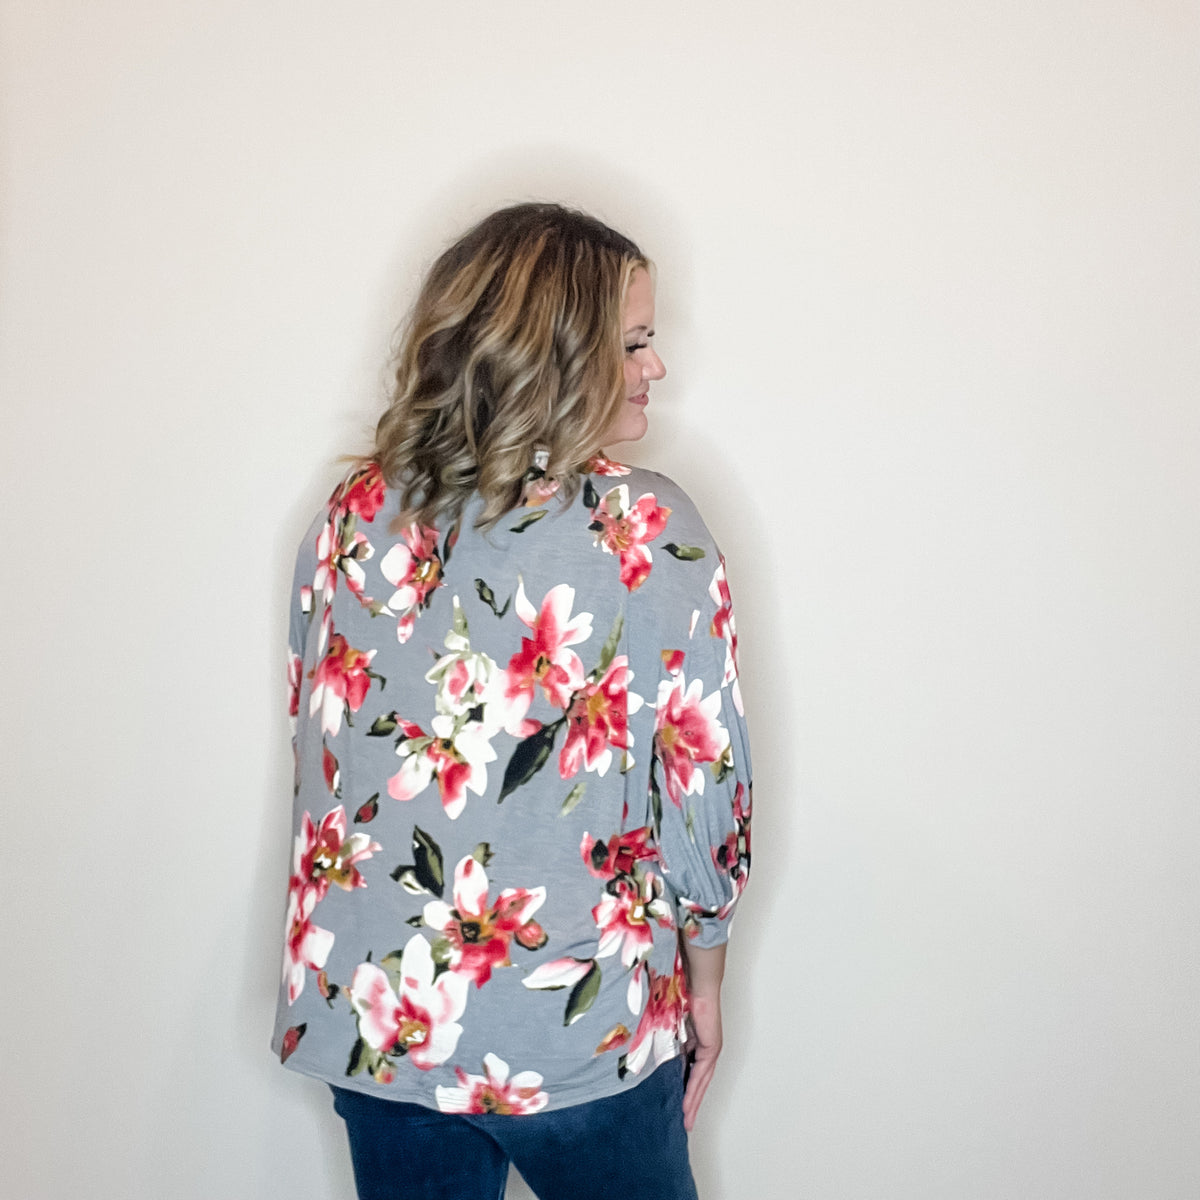 "Right Track" Floral Boho Style Top